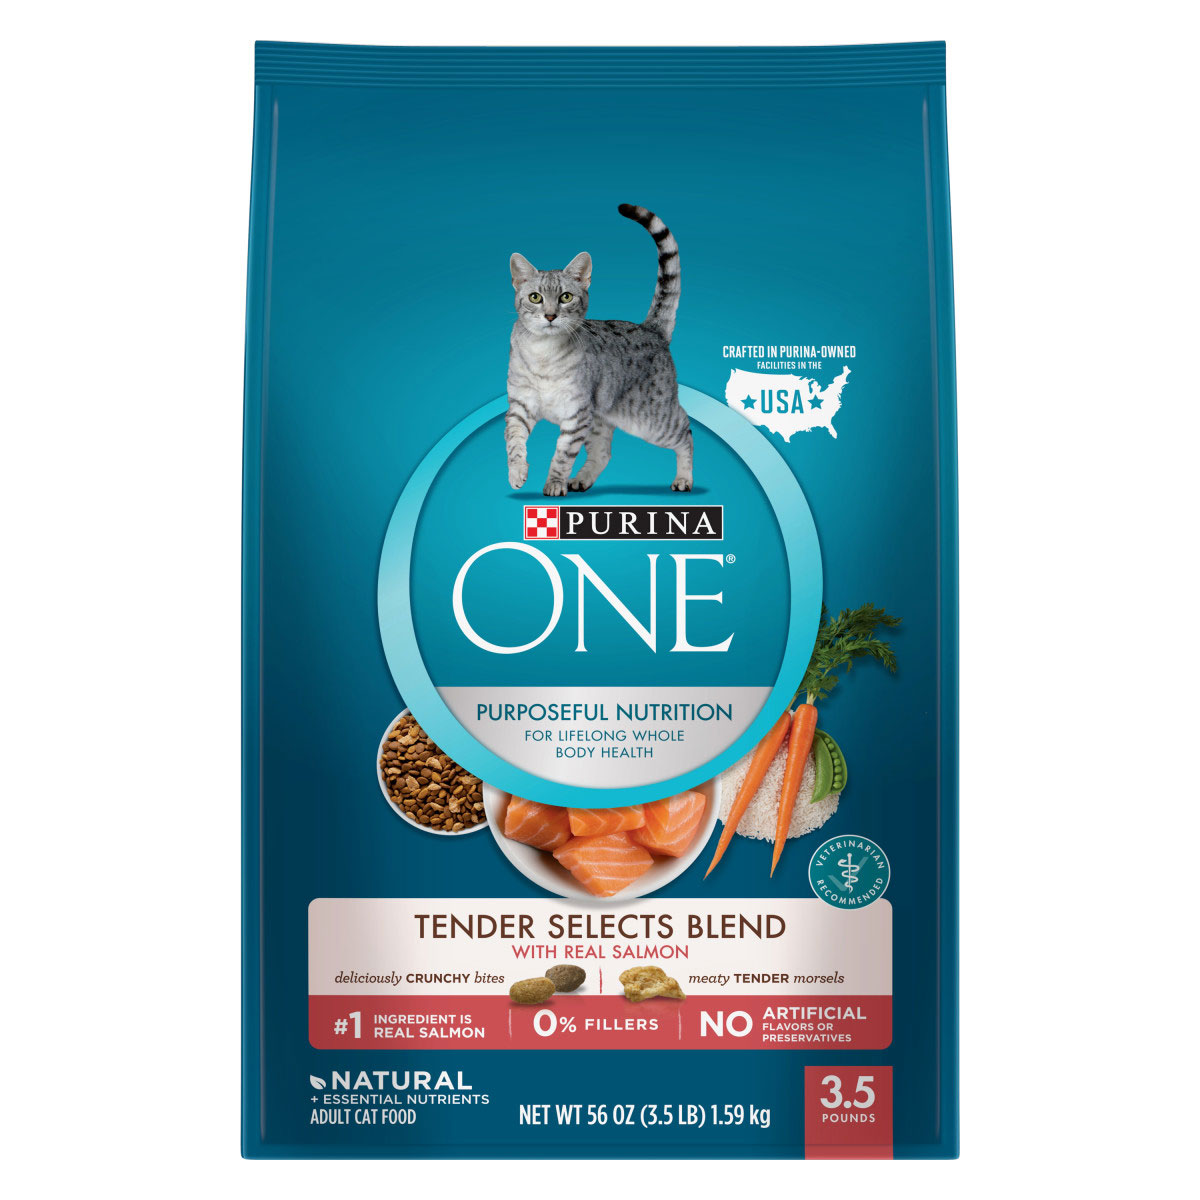 Purina One Cat Food Tender Selects Salmon 3.5lb